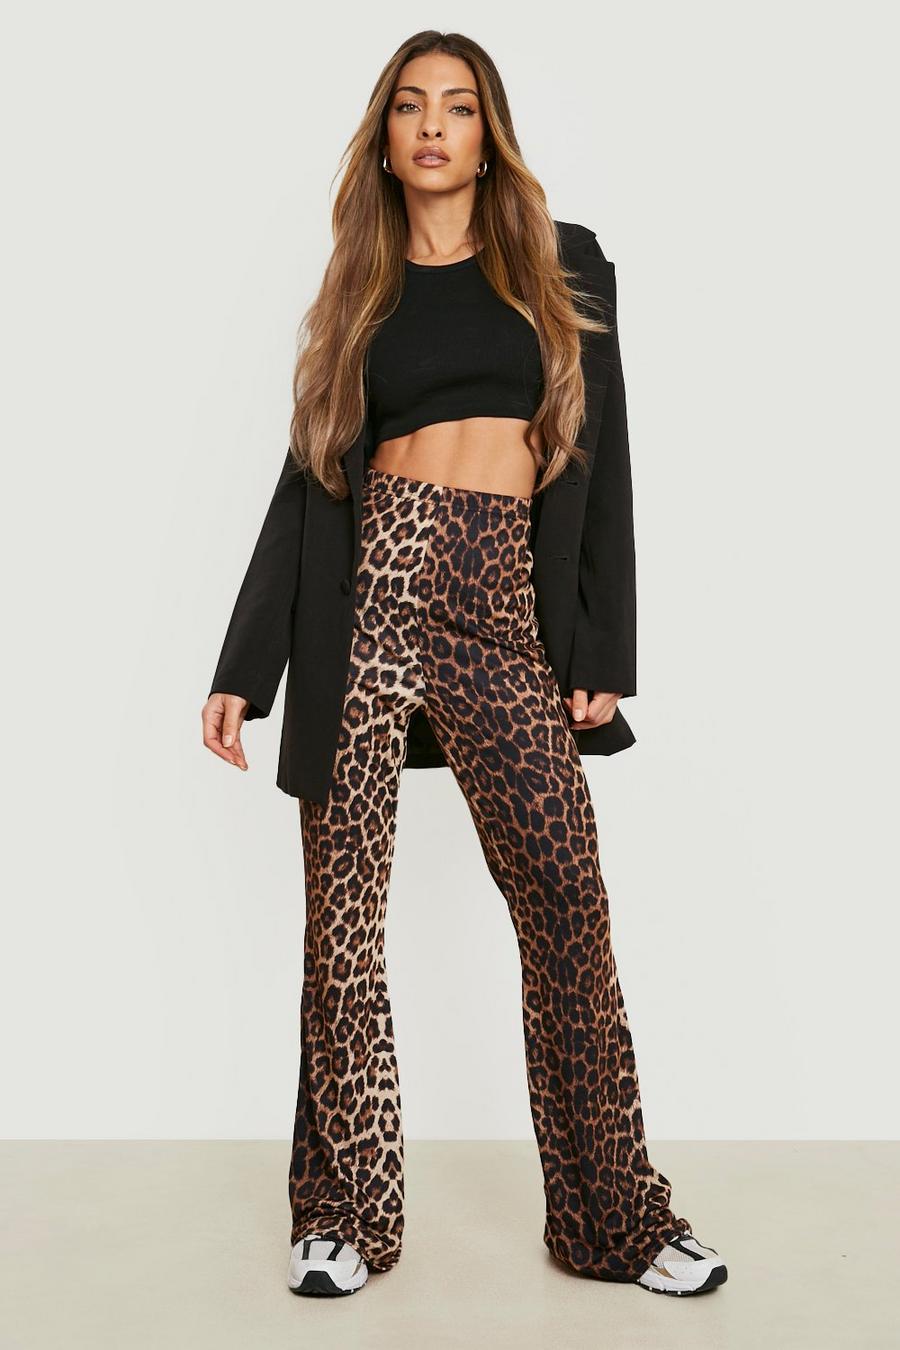 Boohoo Leopard Print Jersey Flare Trouser in Blue Womens Clothing Trousers Slacks and Chinos Full-length trousers 